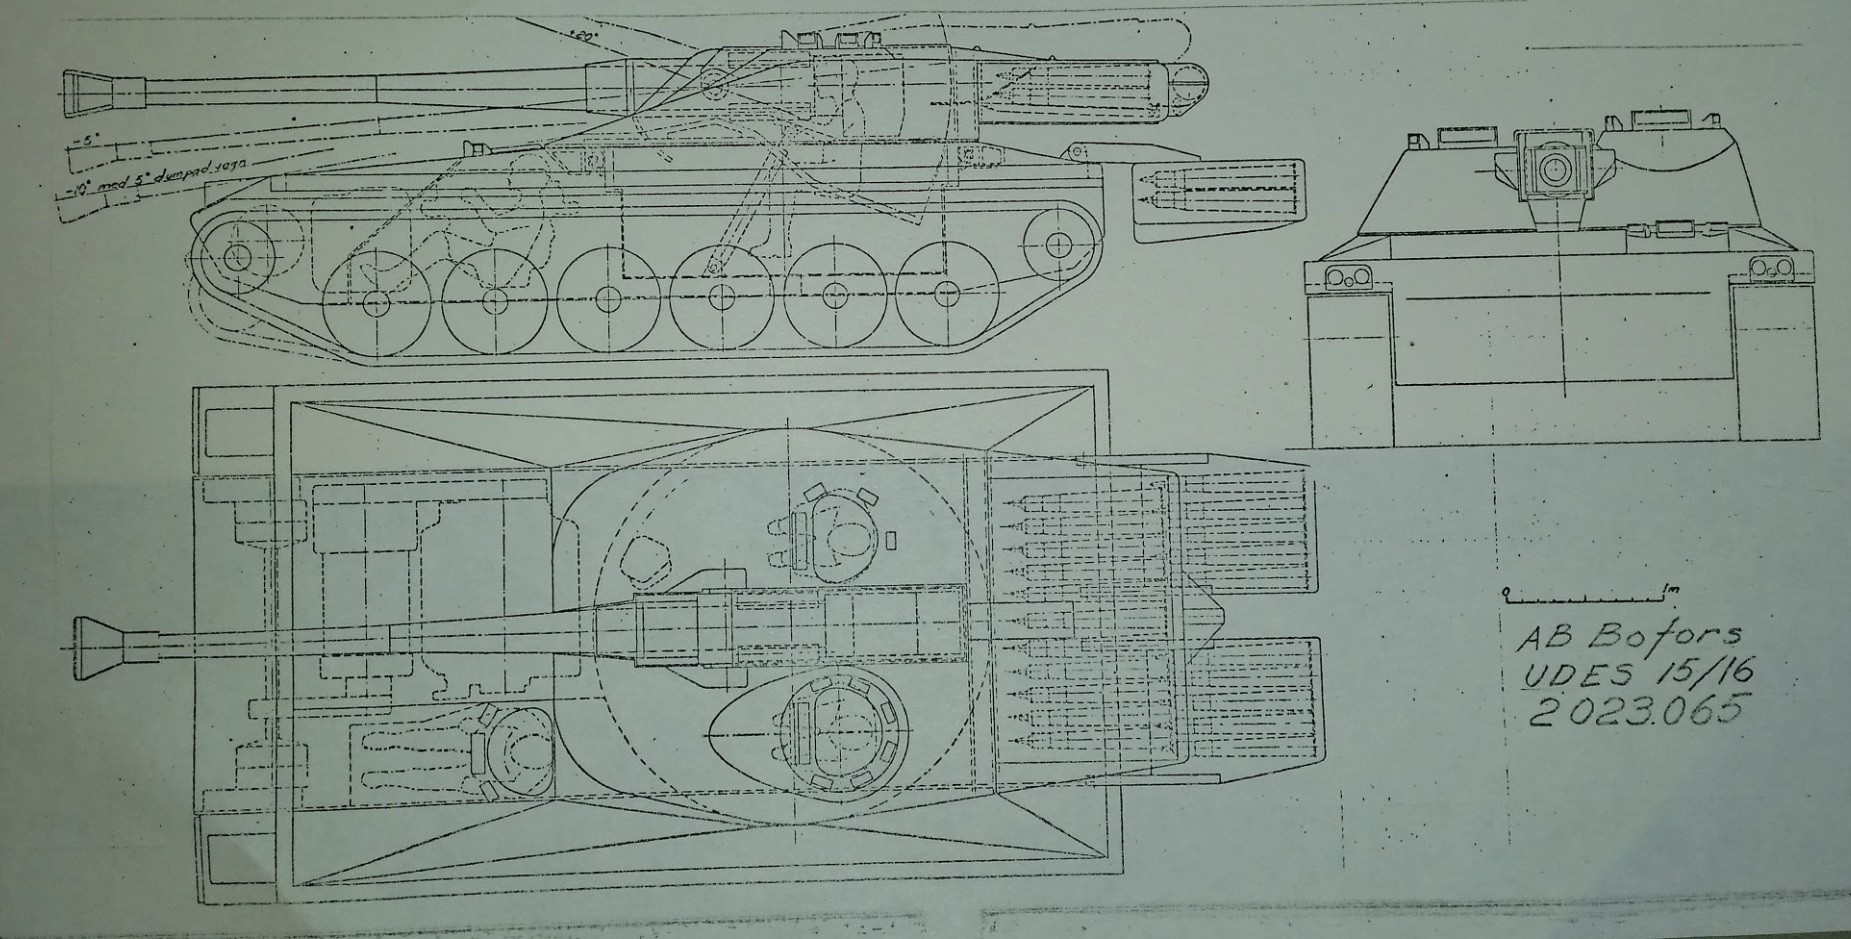 Technical drawing of UDES 15/16